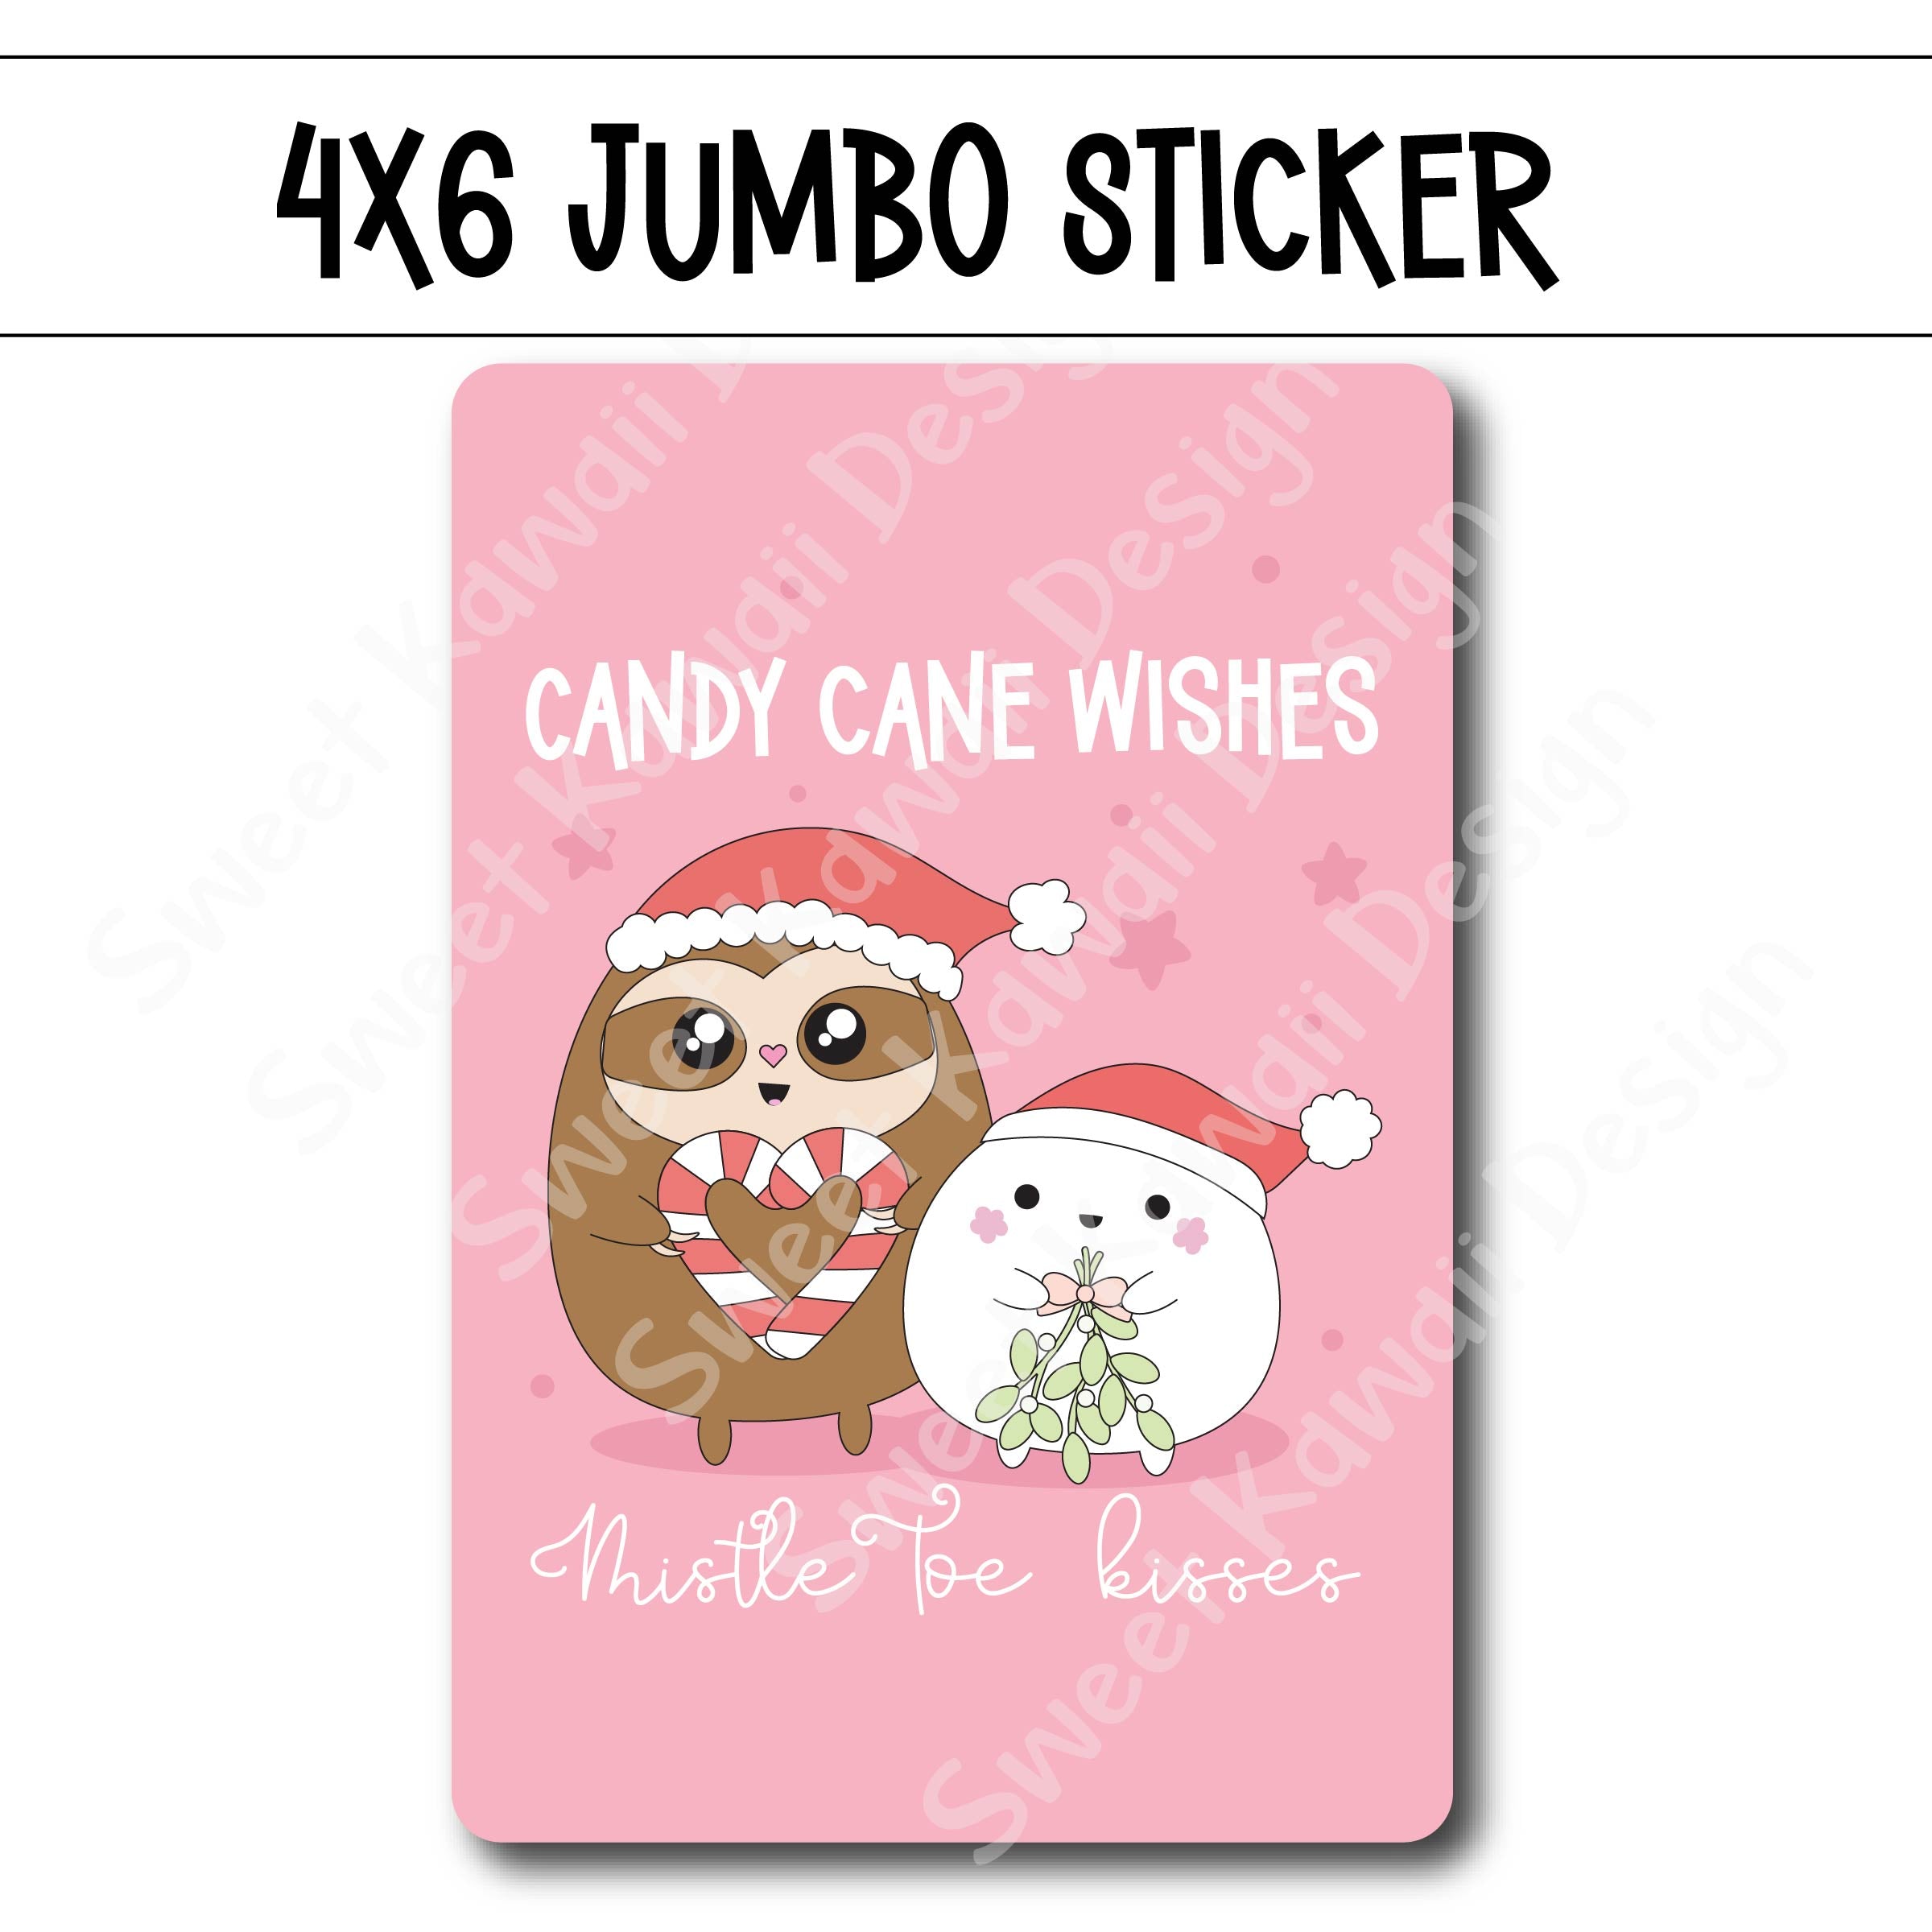 Kawaii Jumbo Sticker - Candy Cane Wishes - Size Options Available